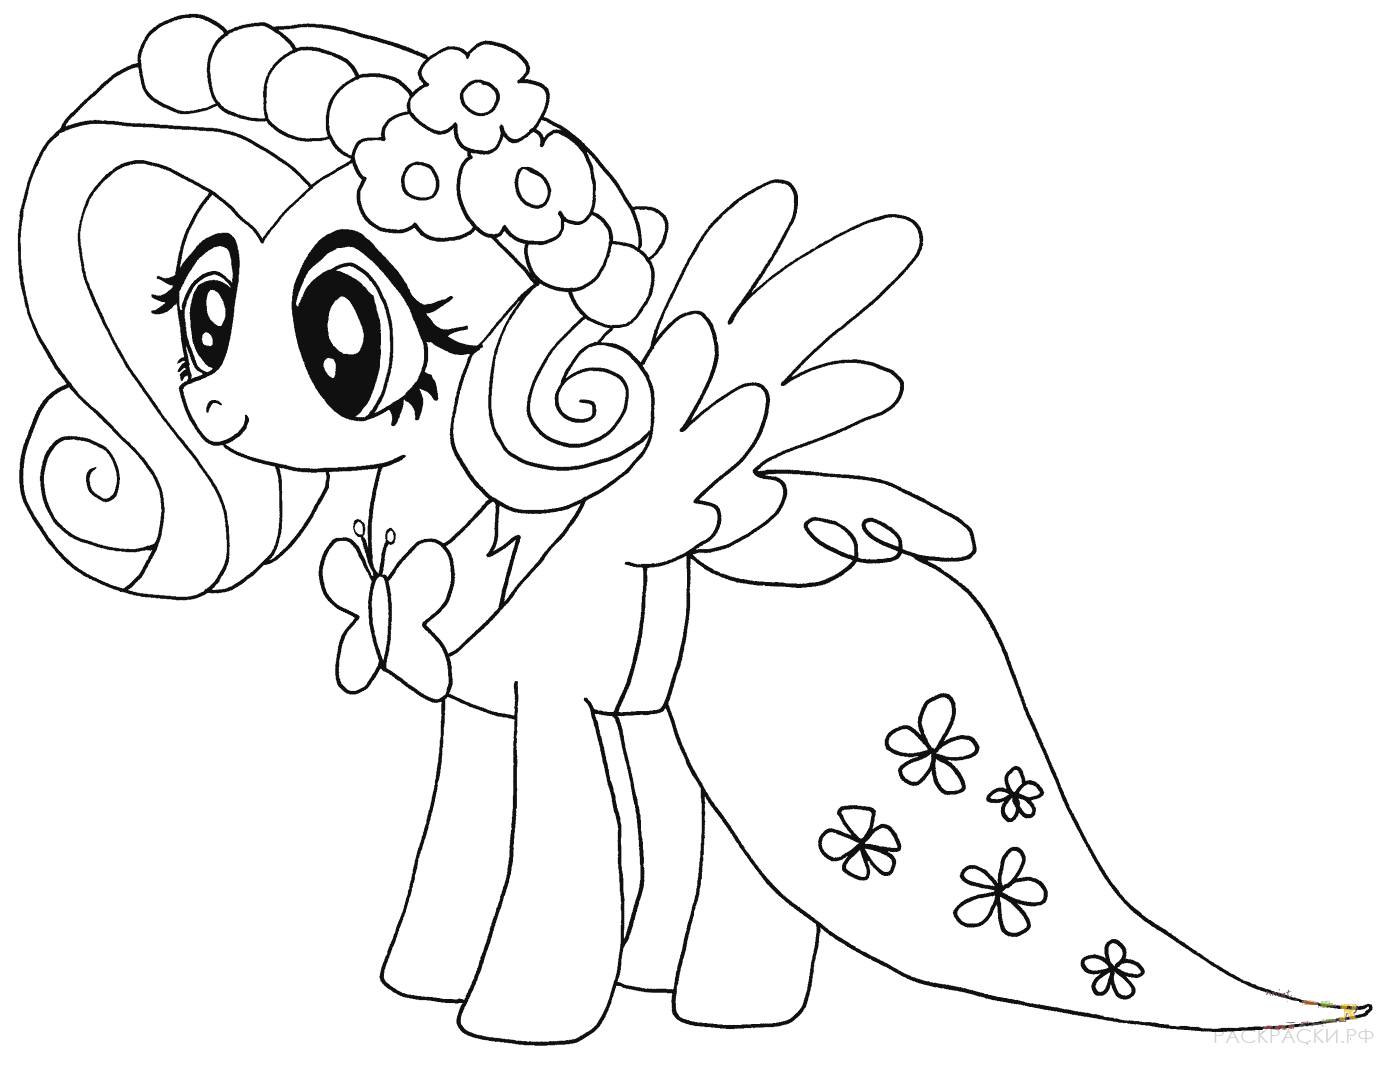 My little pony cute coloring book